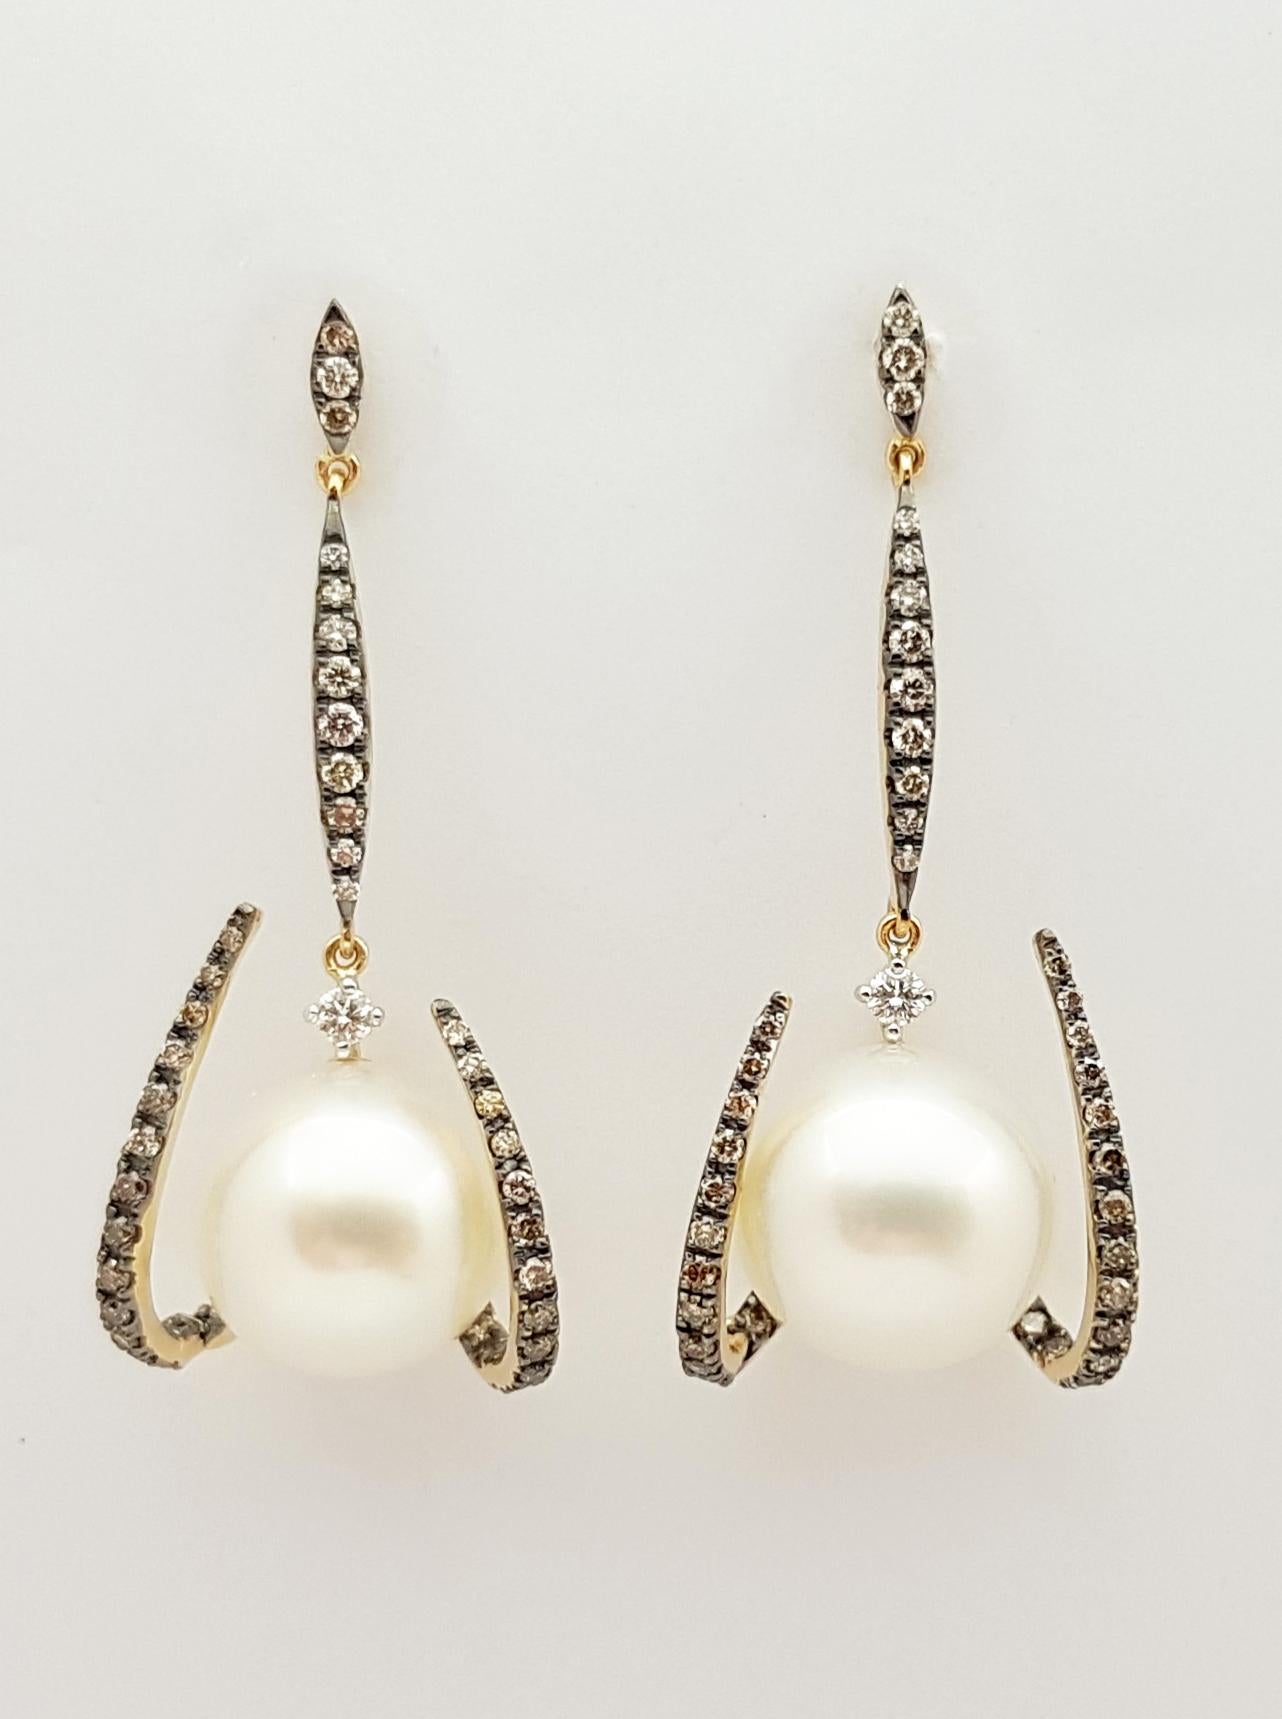 Brilliant Cut Pearl with Brown Diamond and Diamond Earrings in 18K Gold by Kavant & Sharart For Sale